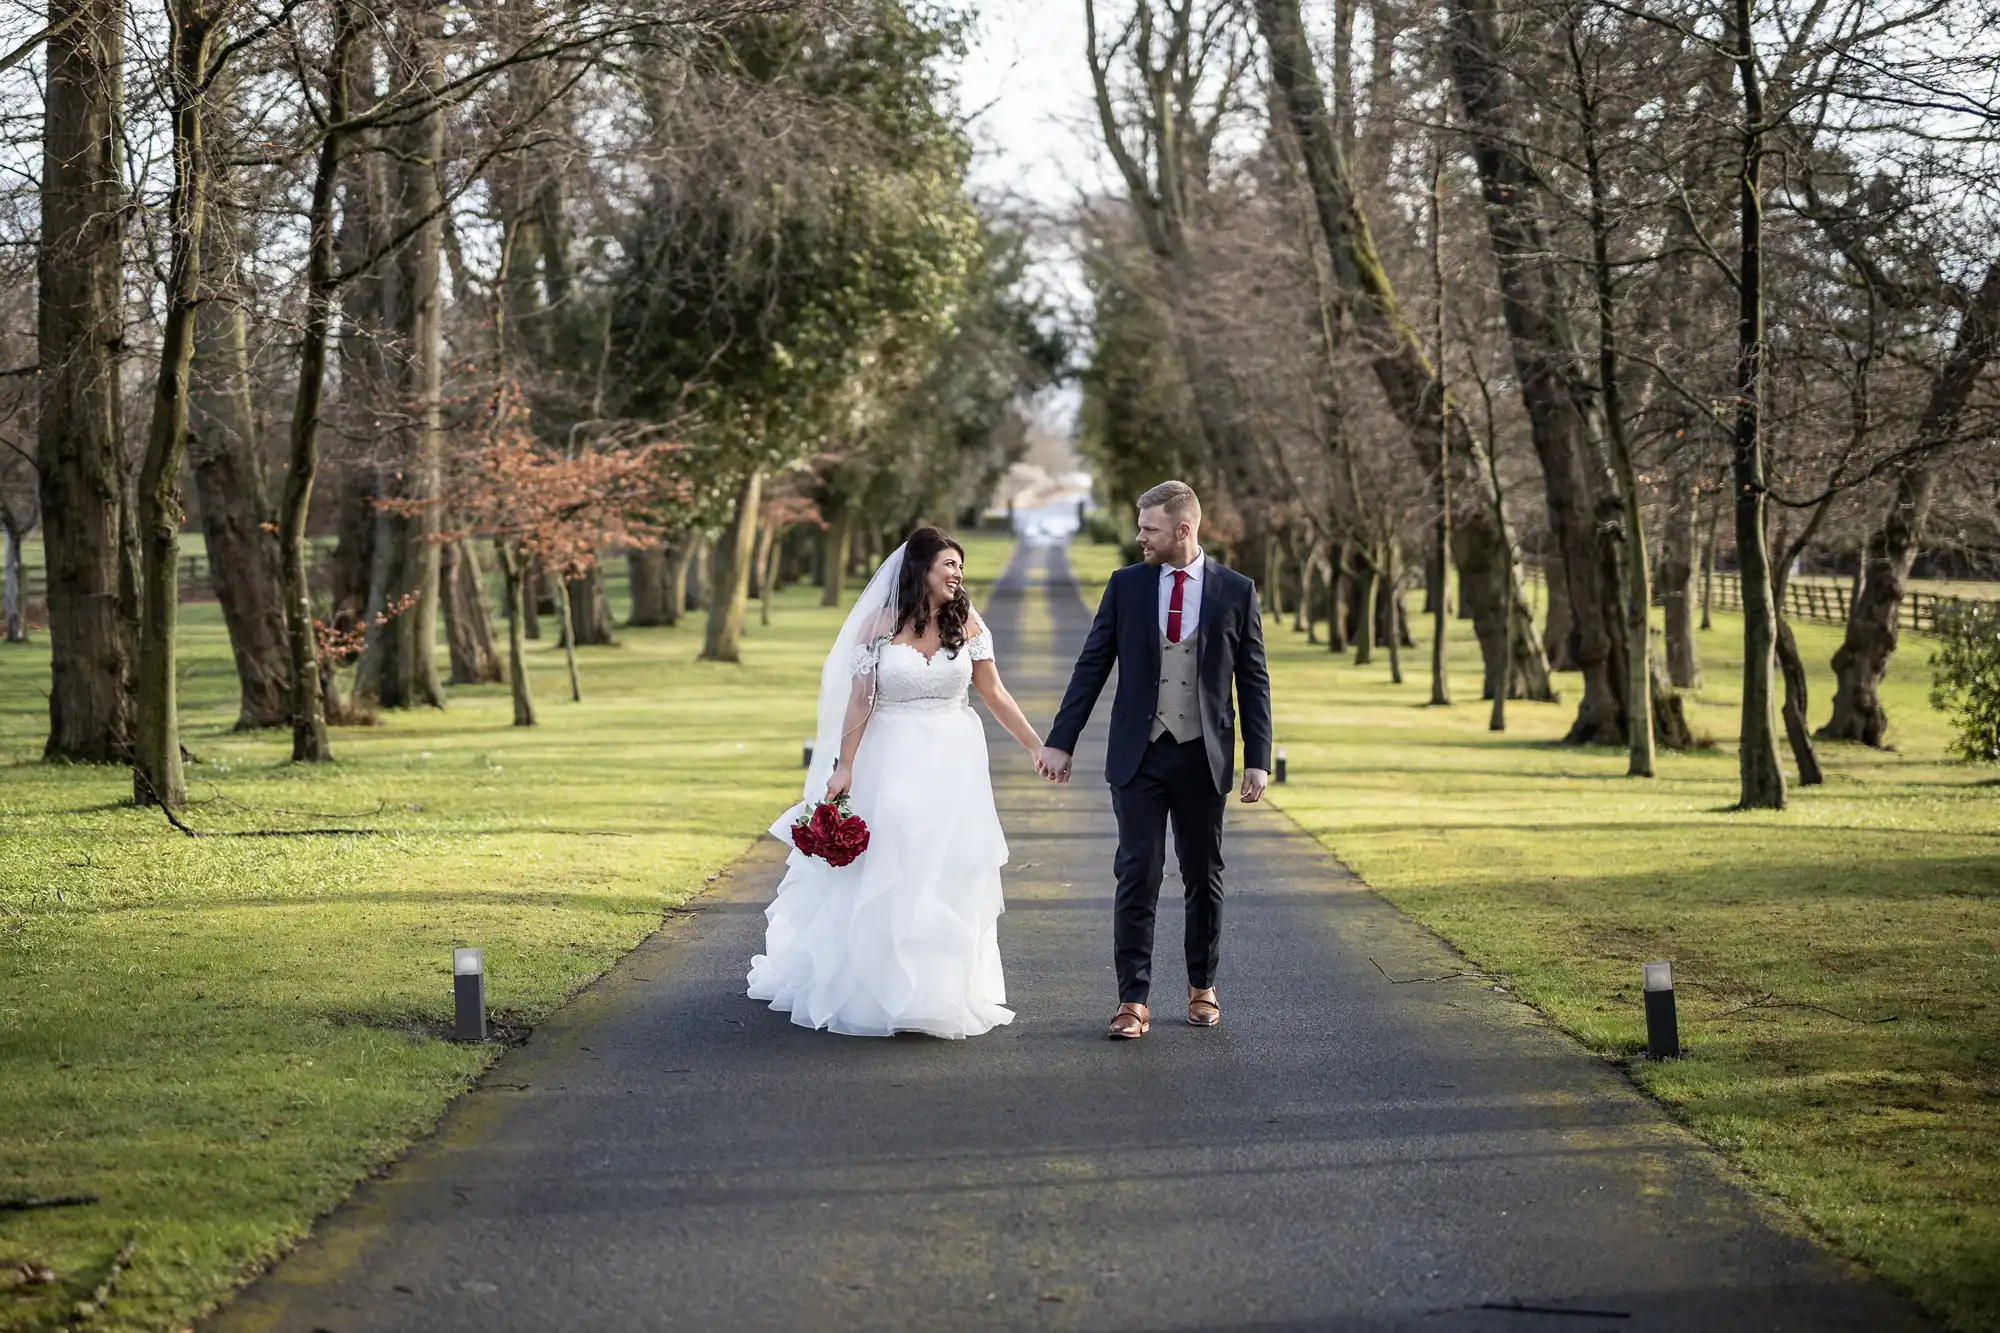 A bride in a white gown and a groom in a suit walk hand in hand on a tree-lined path, surrounded by bare trees and green grass. The bride carries a bouquet of red flowers.